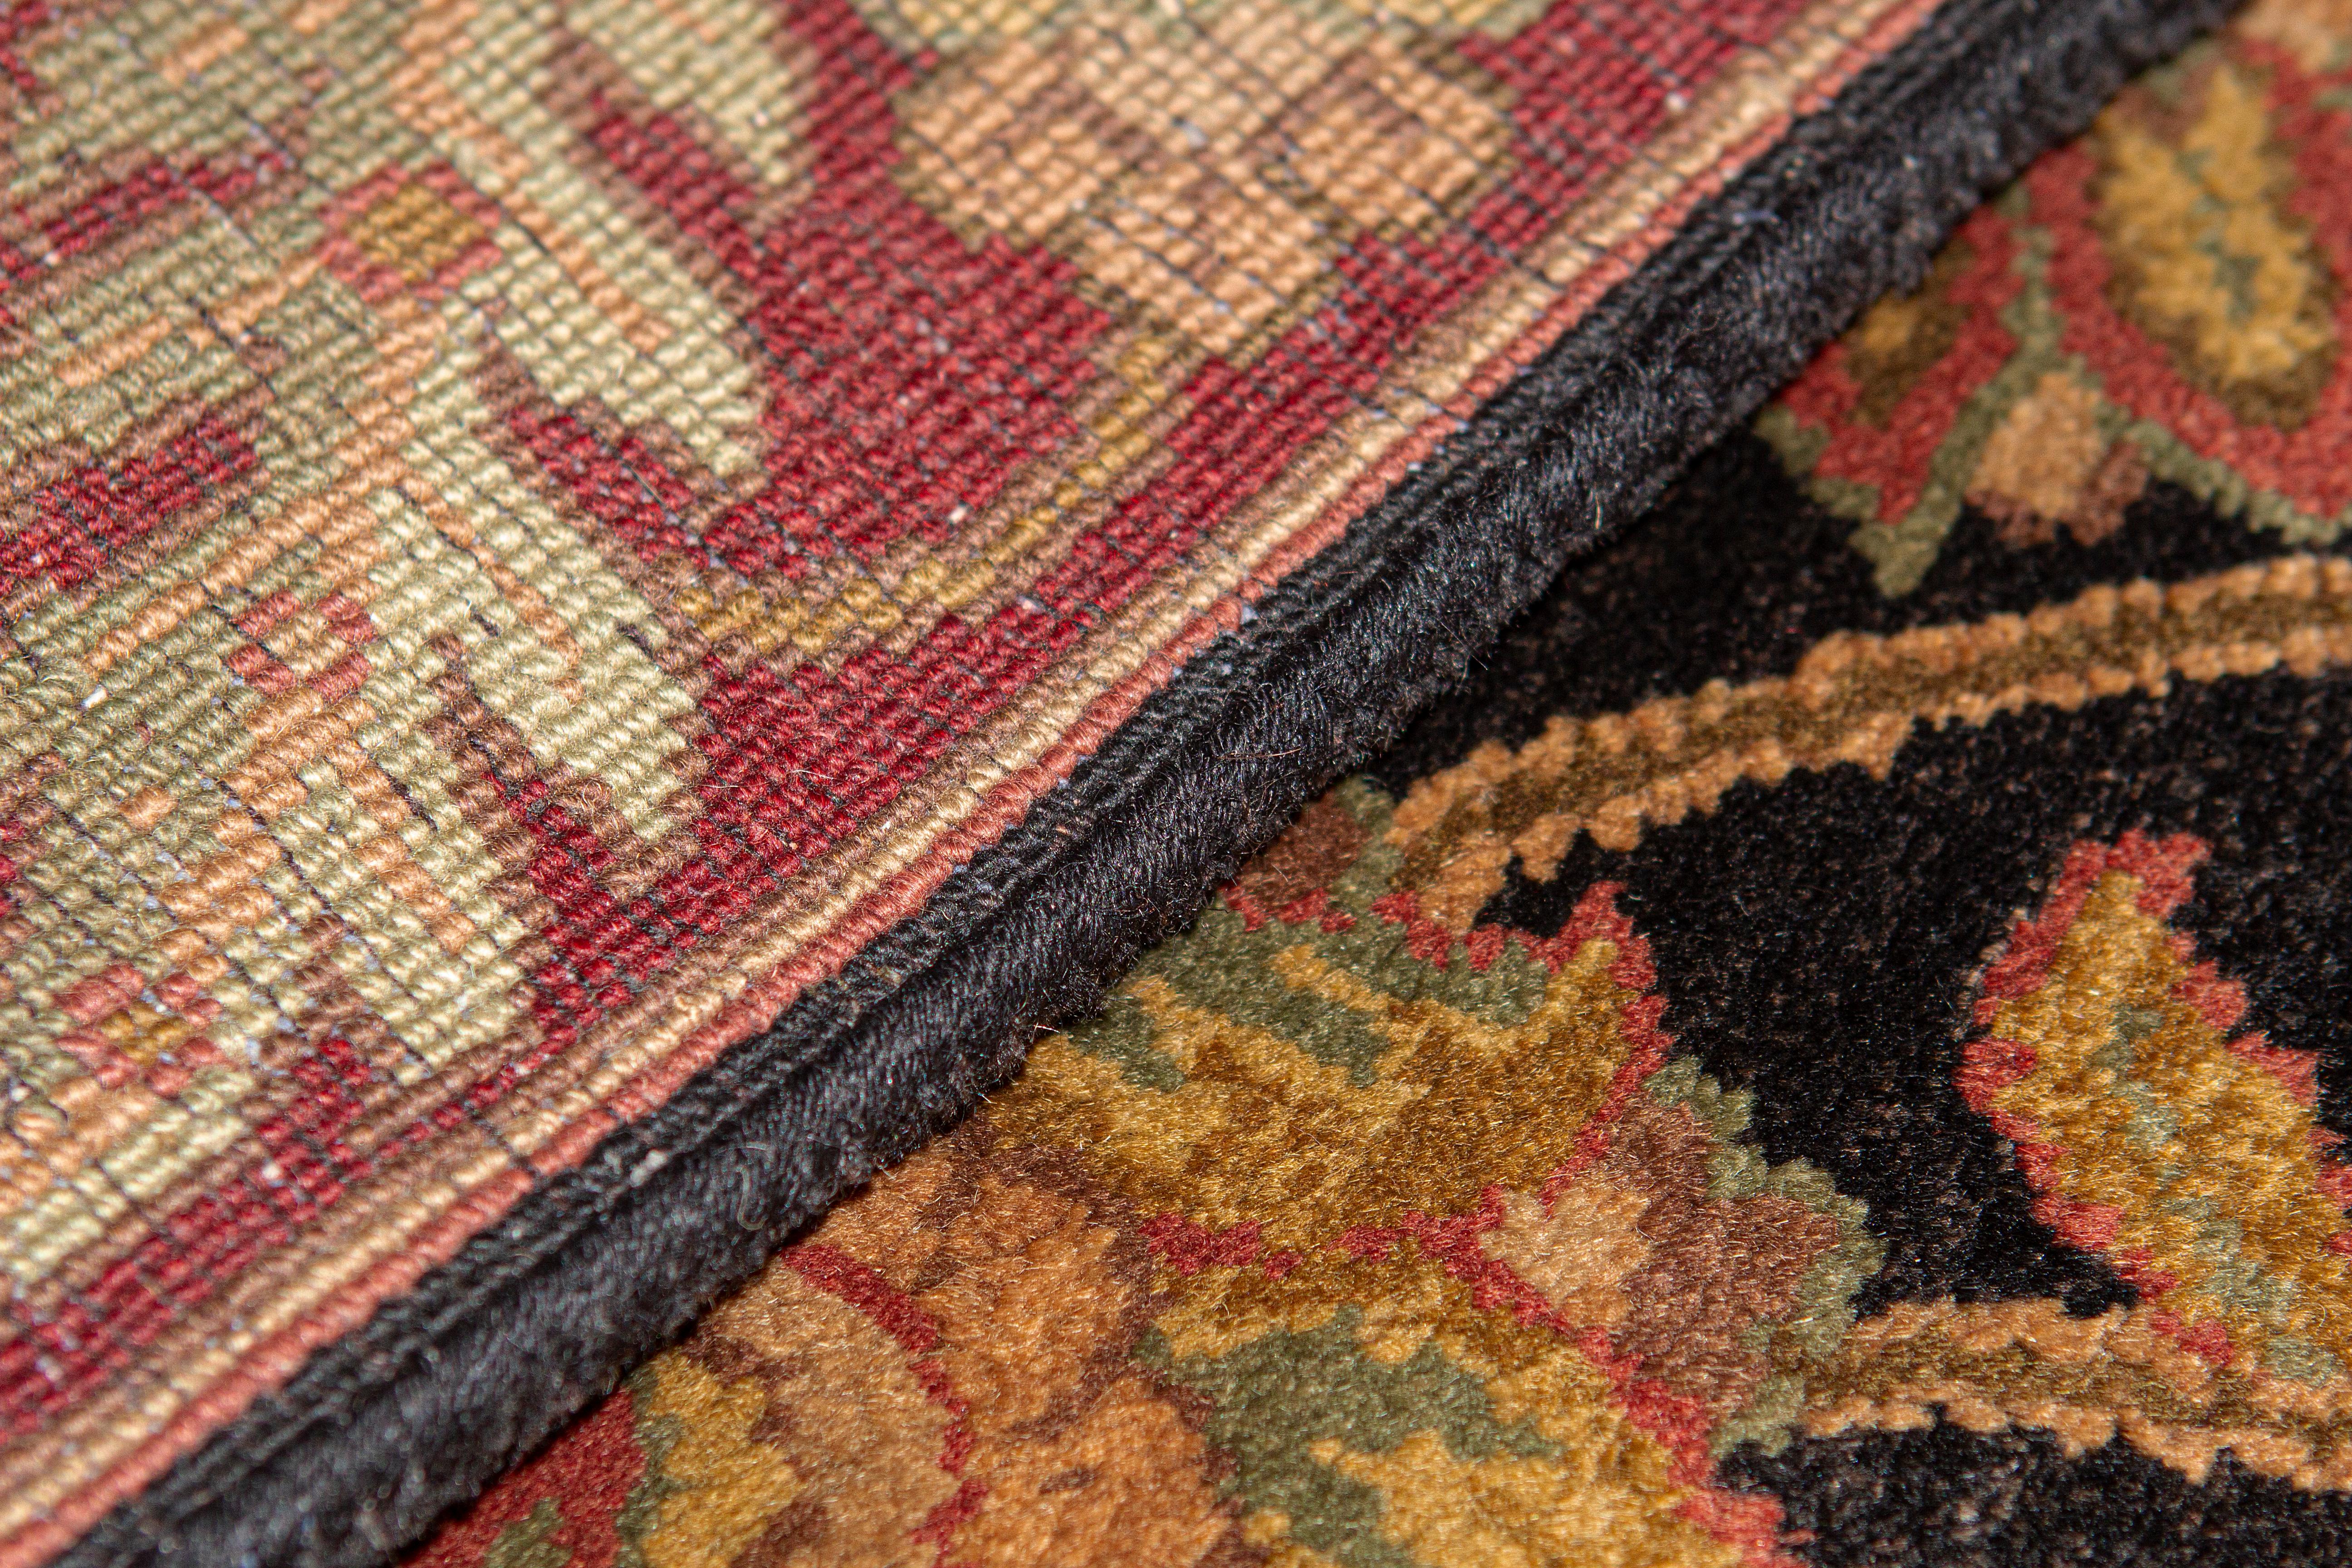 The inspiration for this collection comes from 16th century Indian carpet weavers, who created the most beautiful carpets for the Royal Courts of the Mogul Emperors. Based on authentic Oriental designs and handwoven in the traditional style. Size: